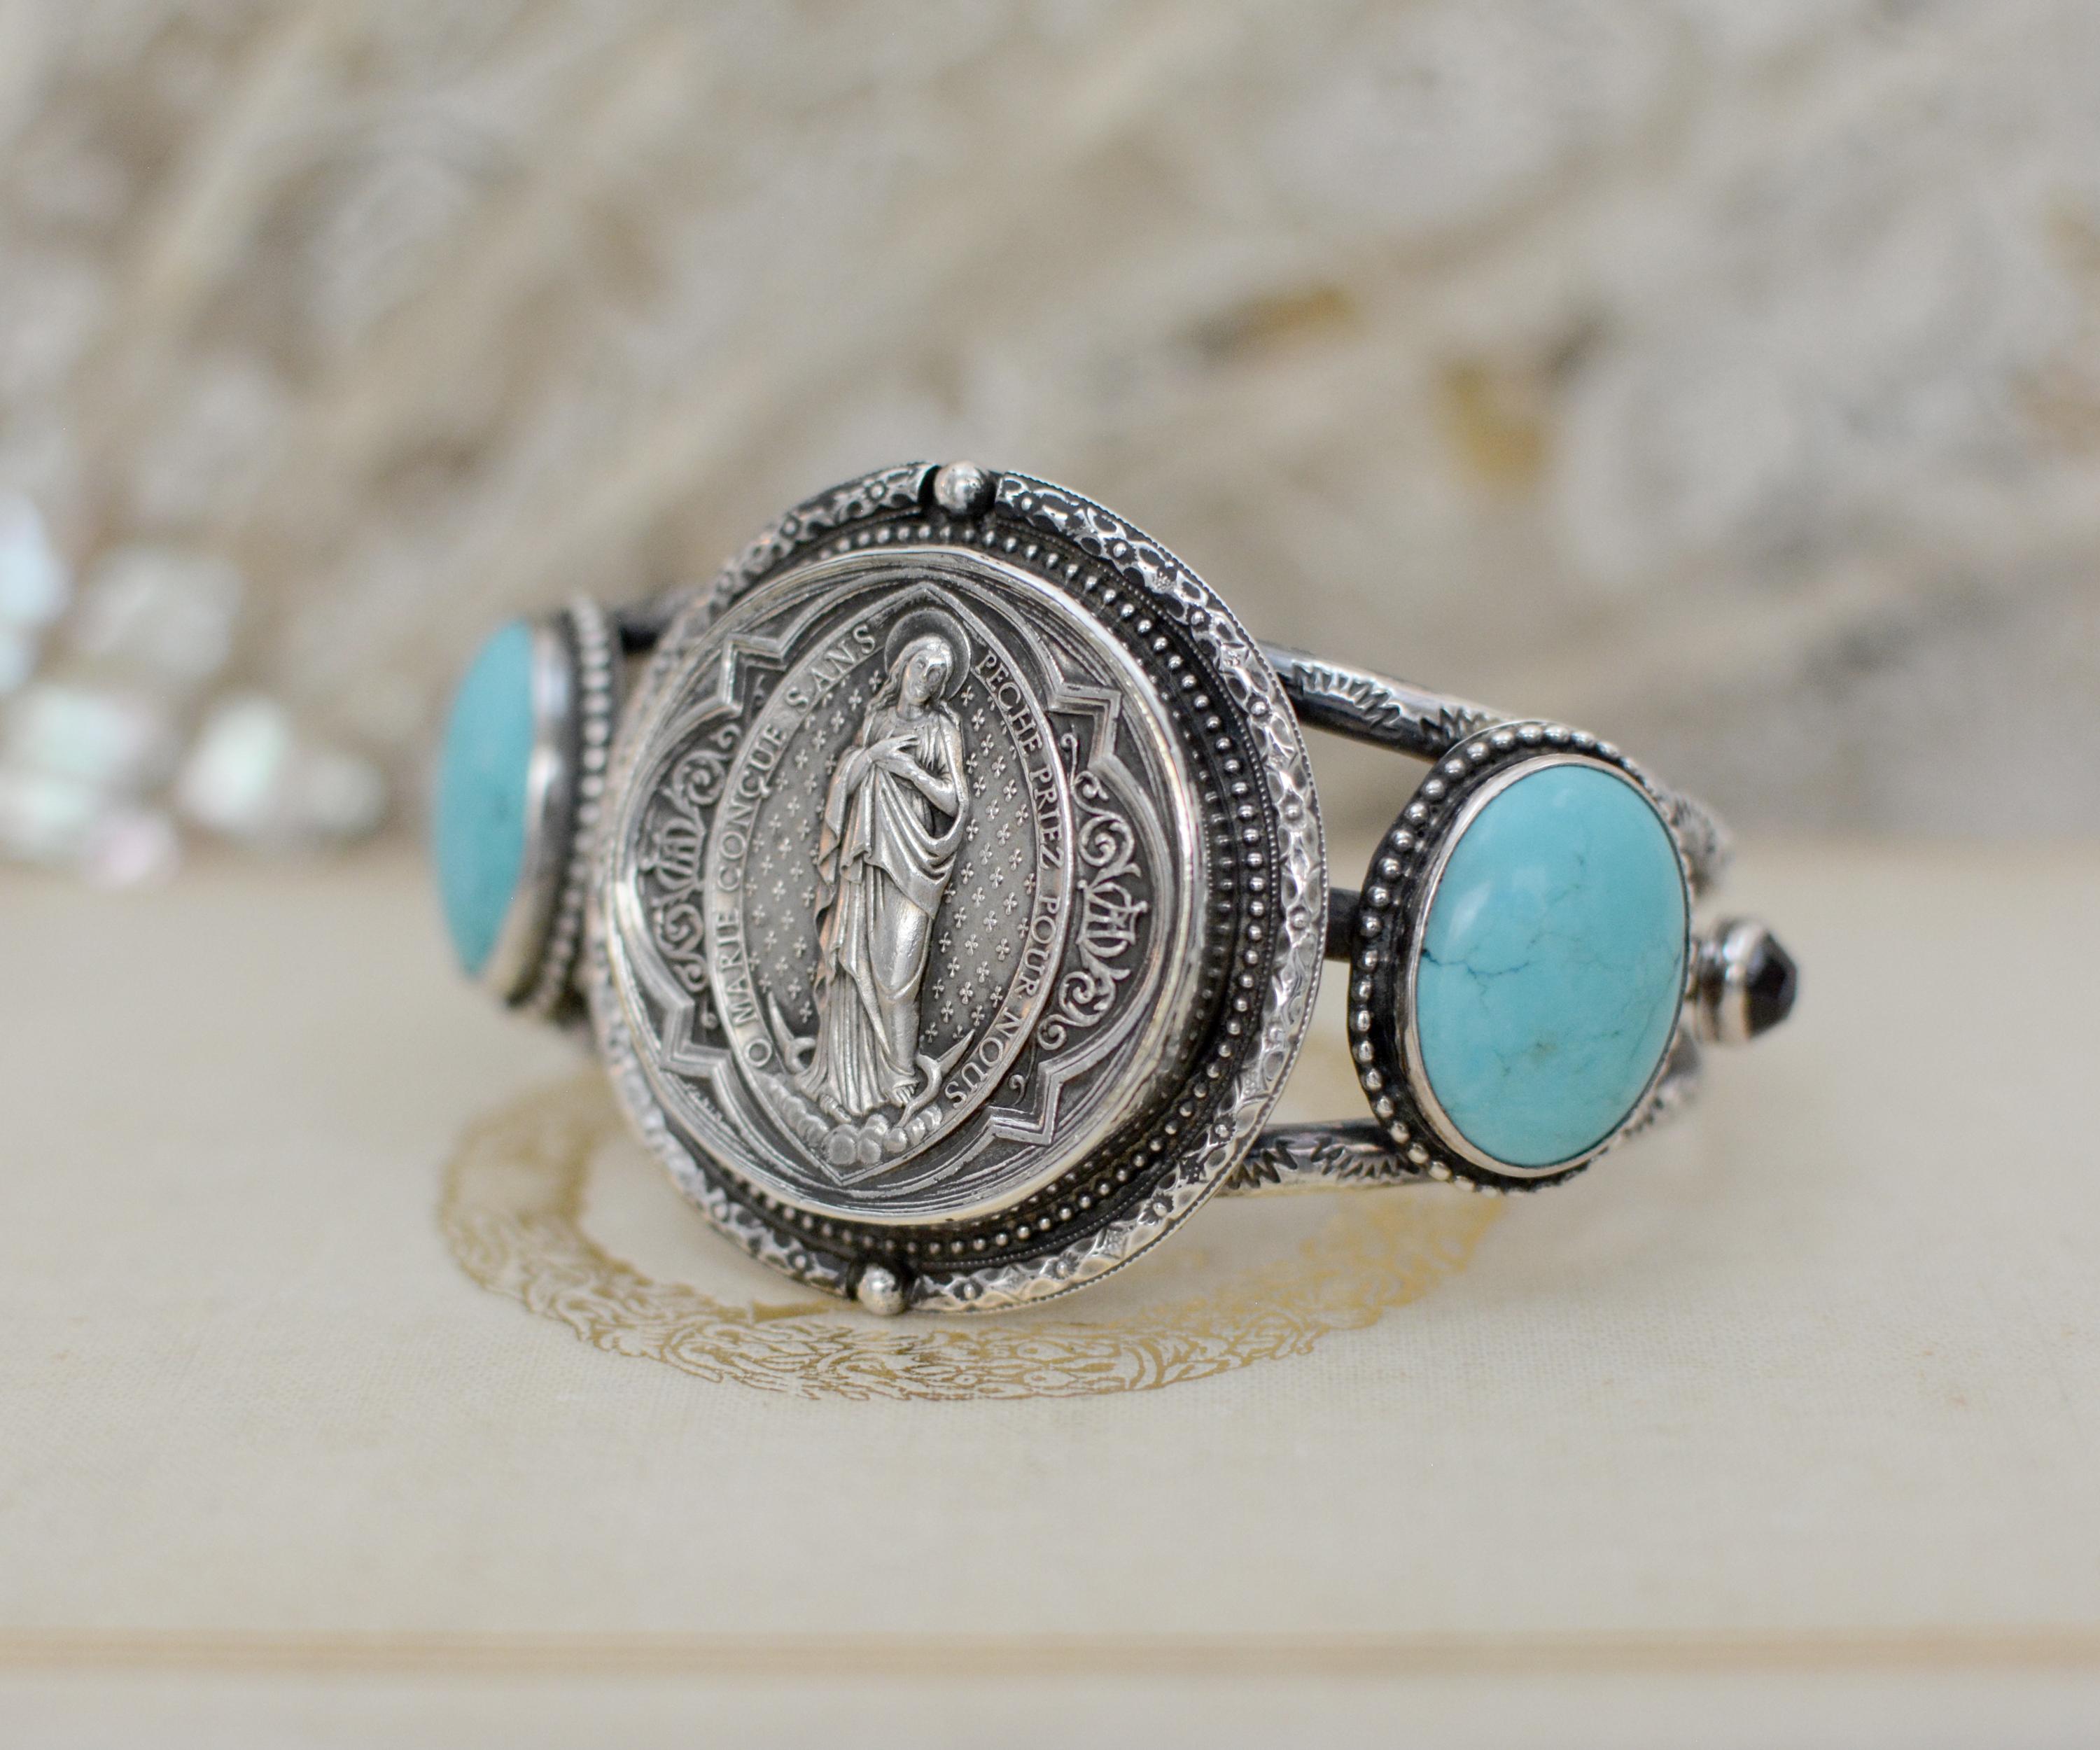 Jill Garber Antique French Sacred Heart Medal with Turquoise Cuff Bracelet In Excellent Condition For Sale In Saginaw, MI